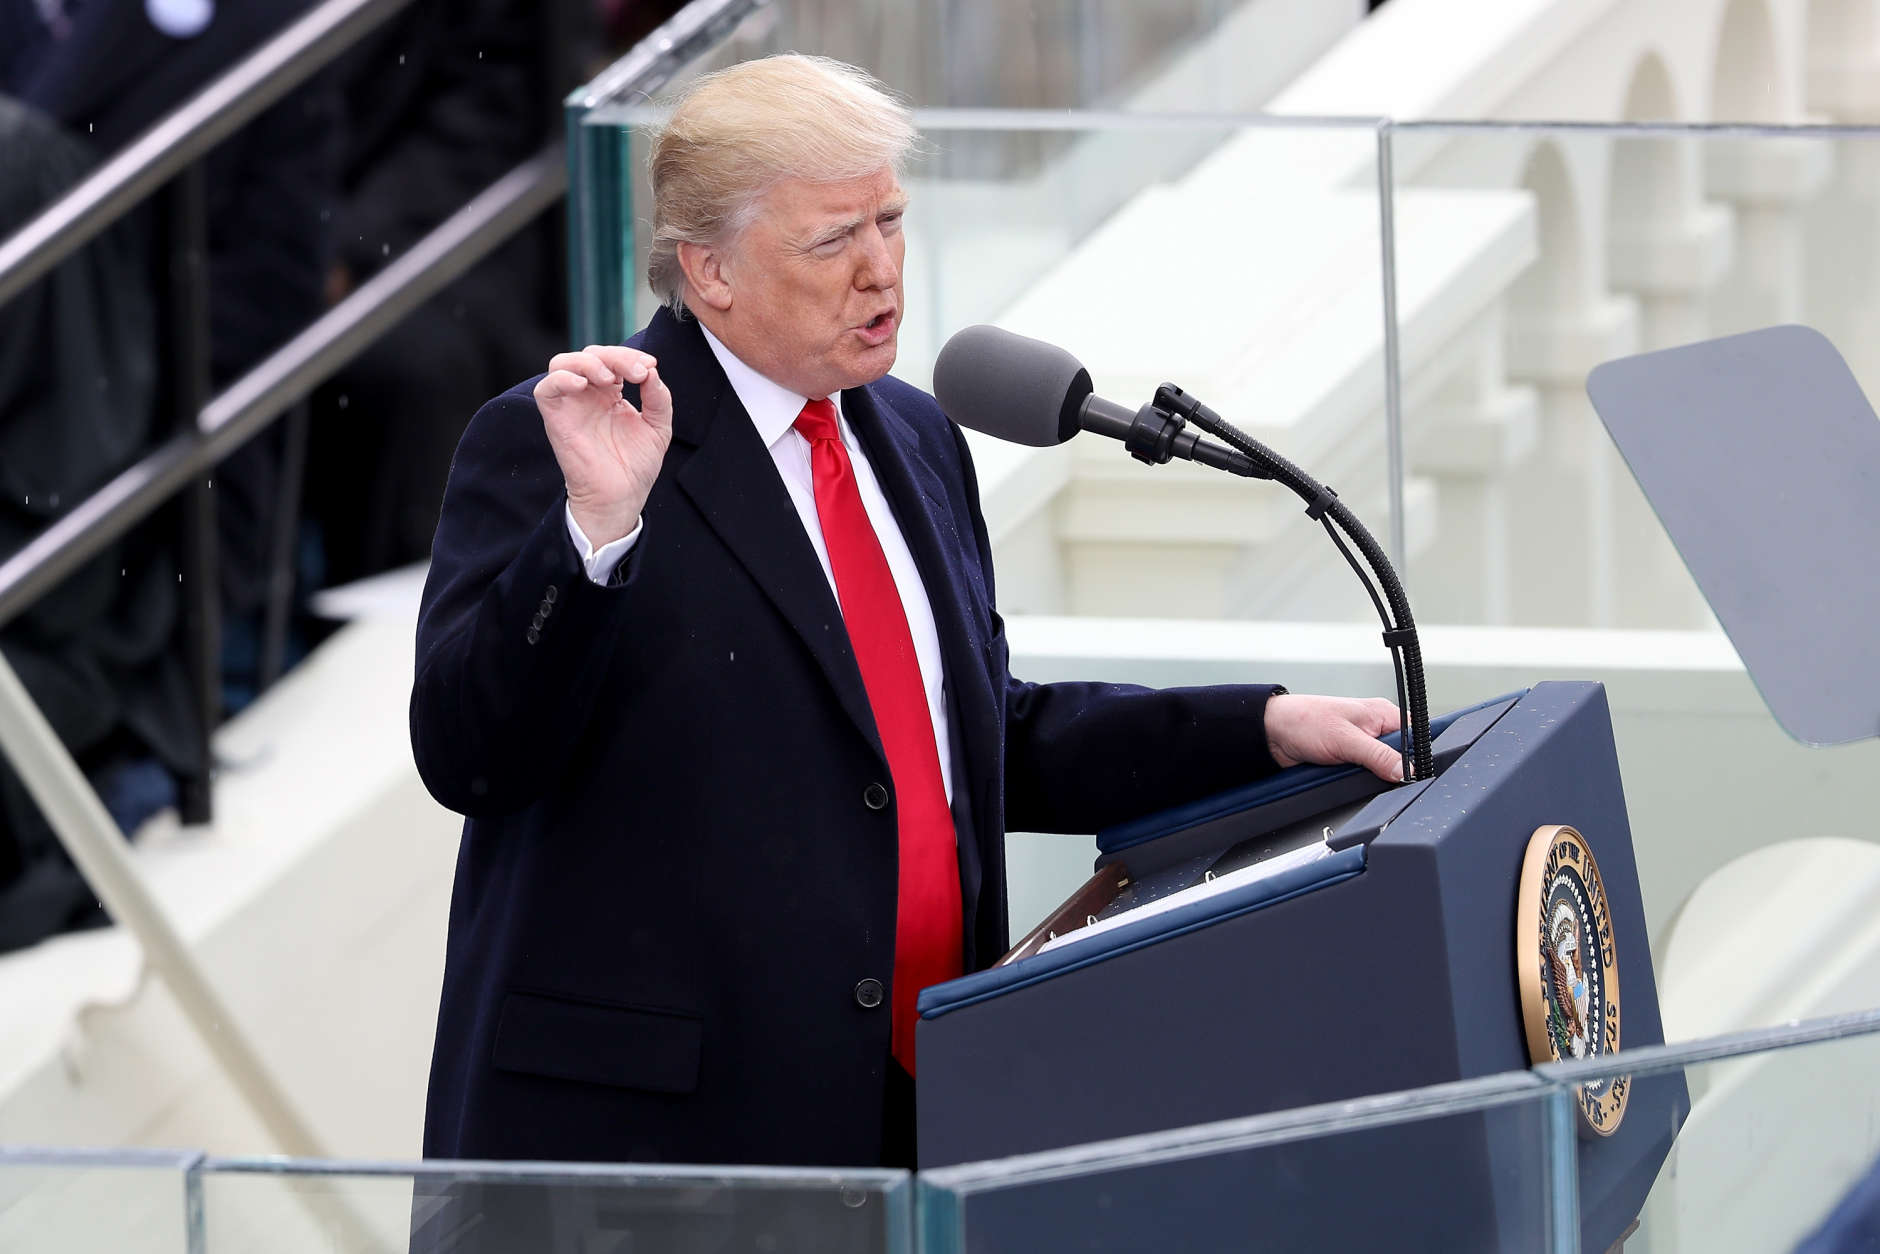 WASHINGTON, DC - JANUARY 20: President Donald Trump delivers his inaugural address on the West Front of the U.S. Capitol on January 20, 2017 in Washington, DC. In today's inauguration ceremony Donald J. Trump becomes the 45th president of the United States.  (Photo by Joe Raedle/Getty Images)